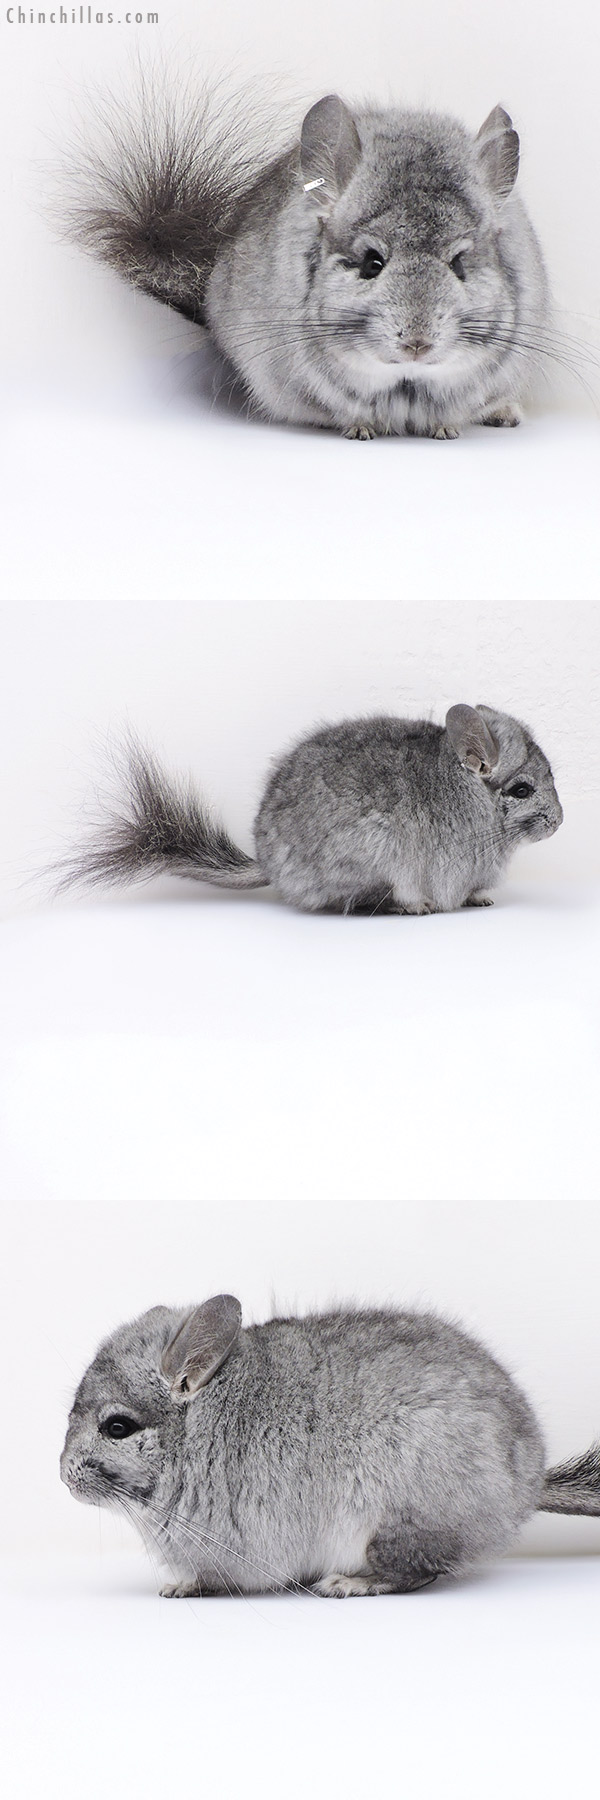 Chinchilla or related item offered for sale or export on Chinchillas.com - 17209 Standard  Royal Persian Angora Male Chinchilla